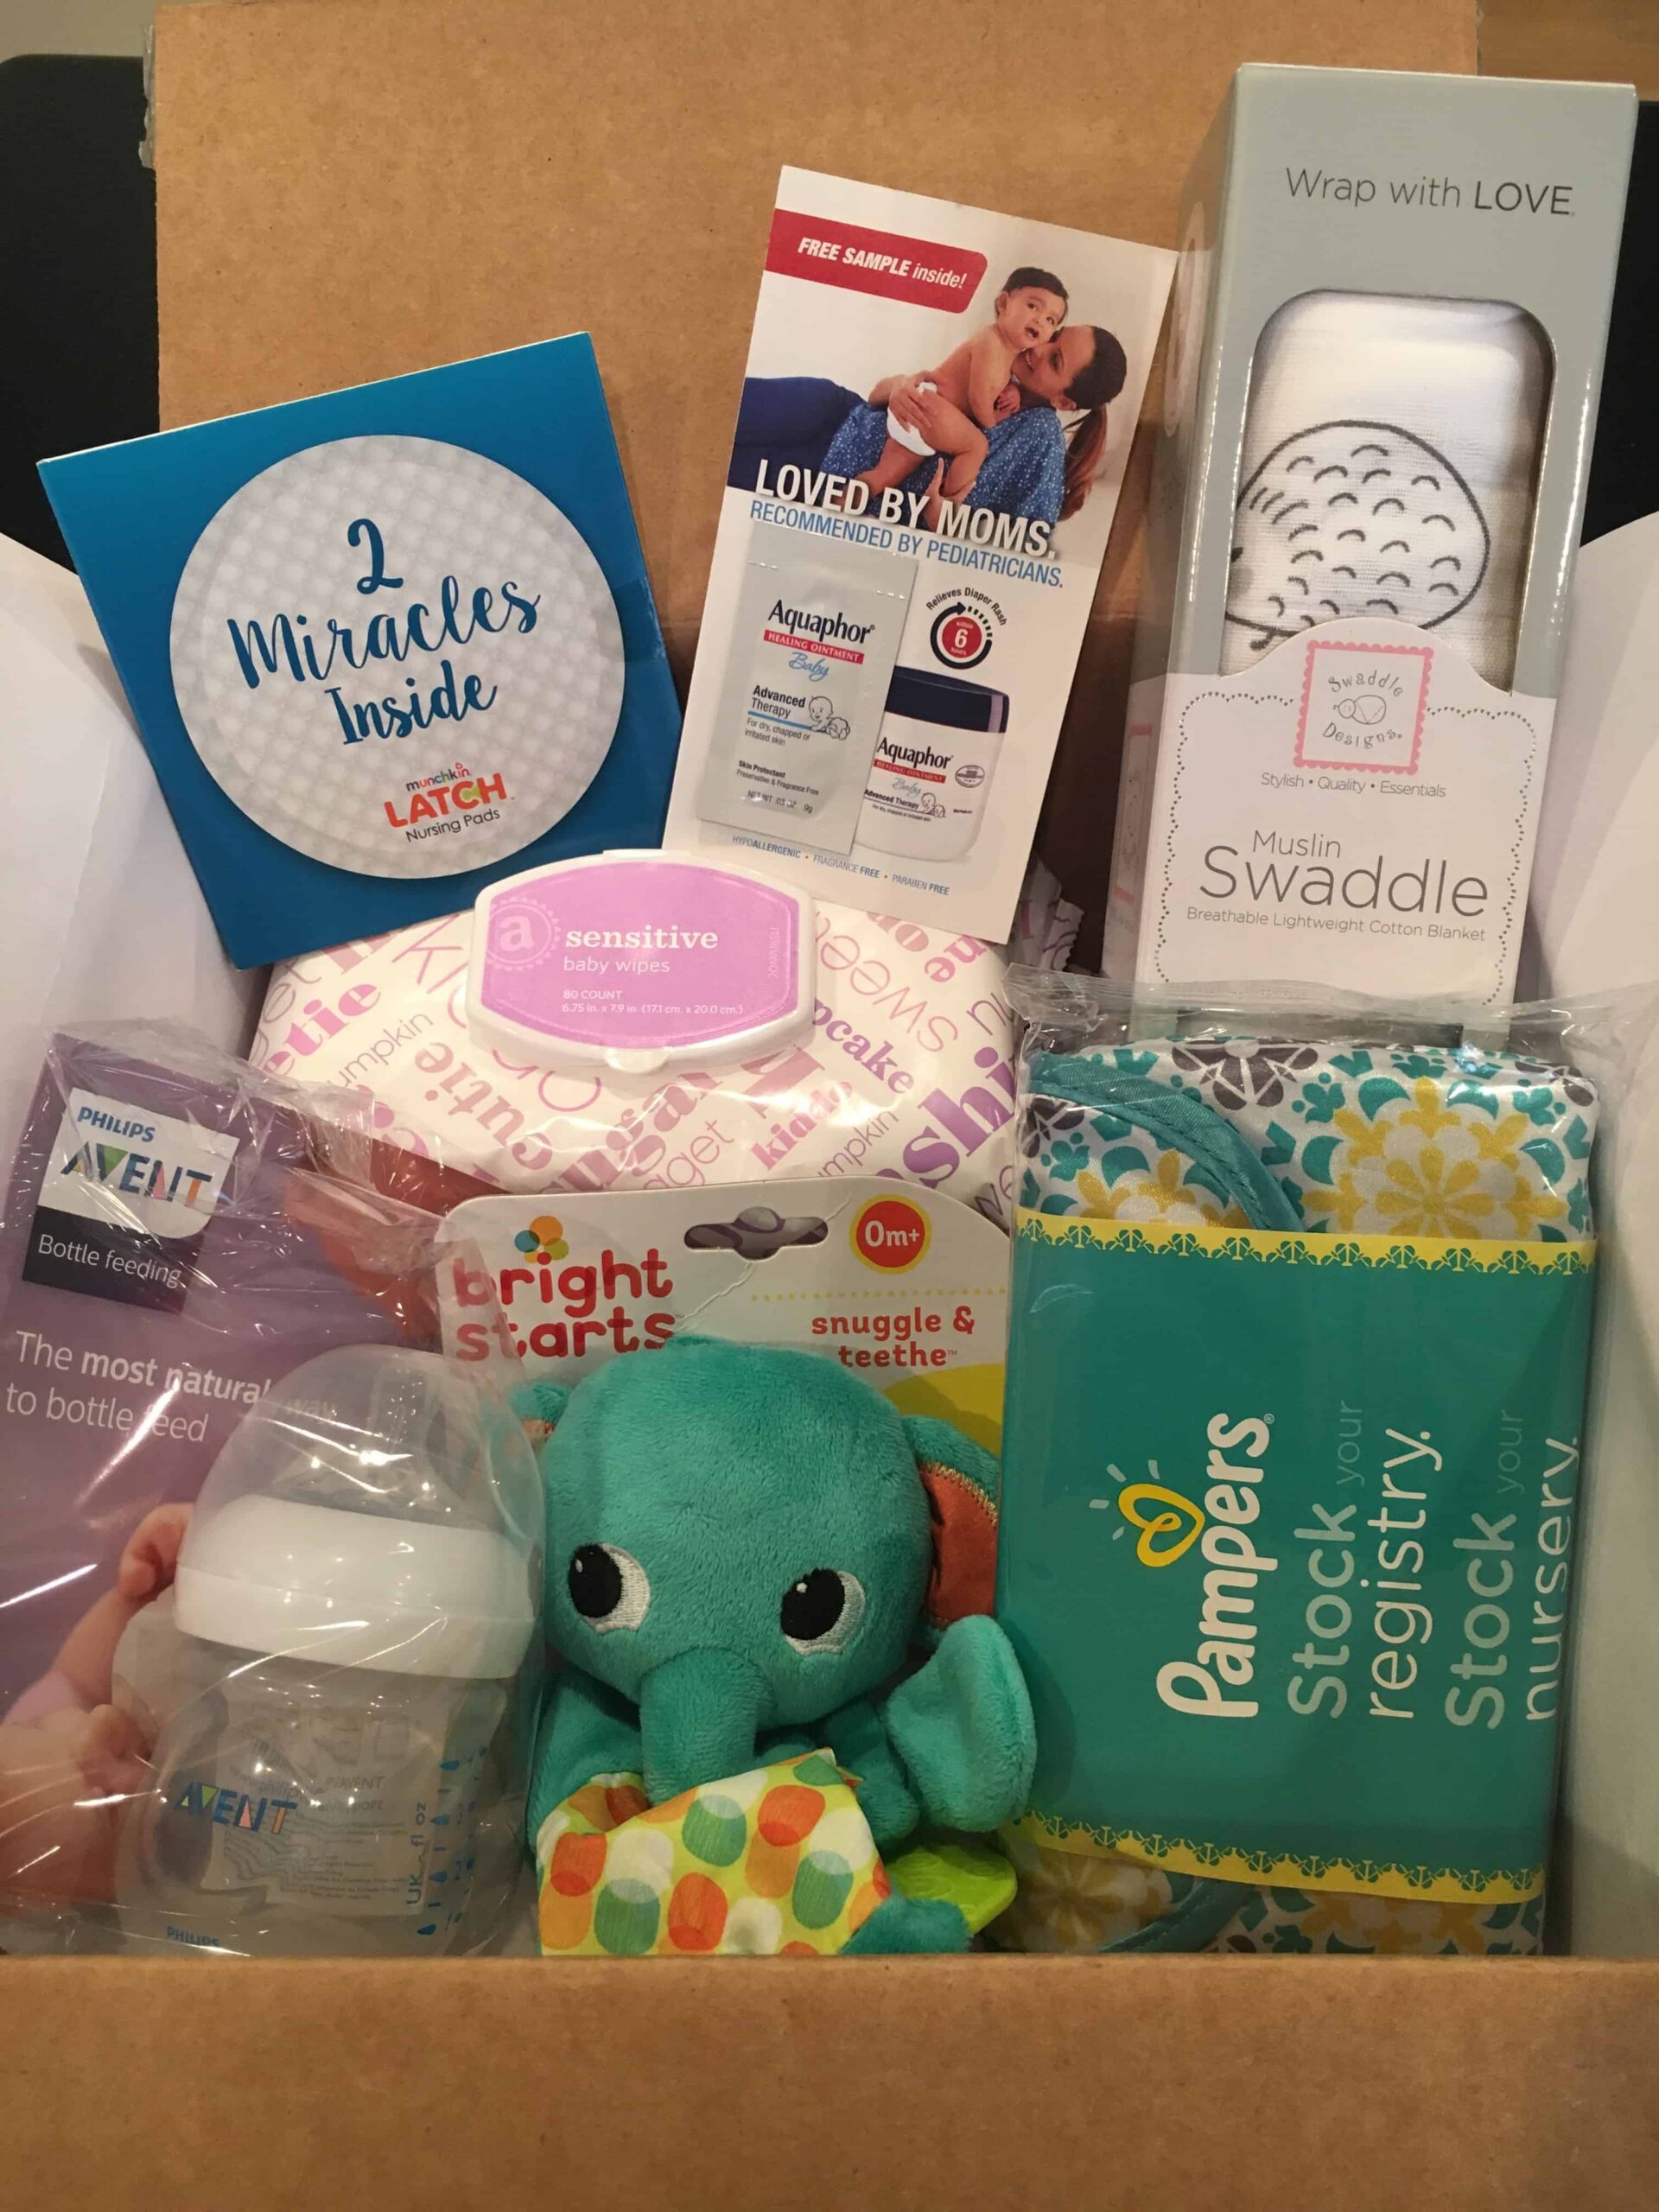 How To Claim Your Free Baby Registry Welcome Box In 5 Easy Steps